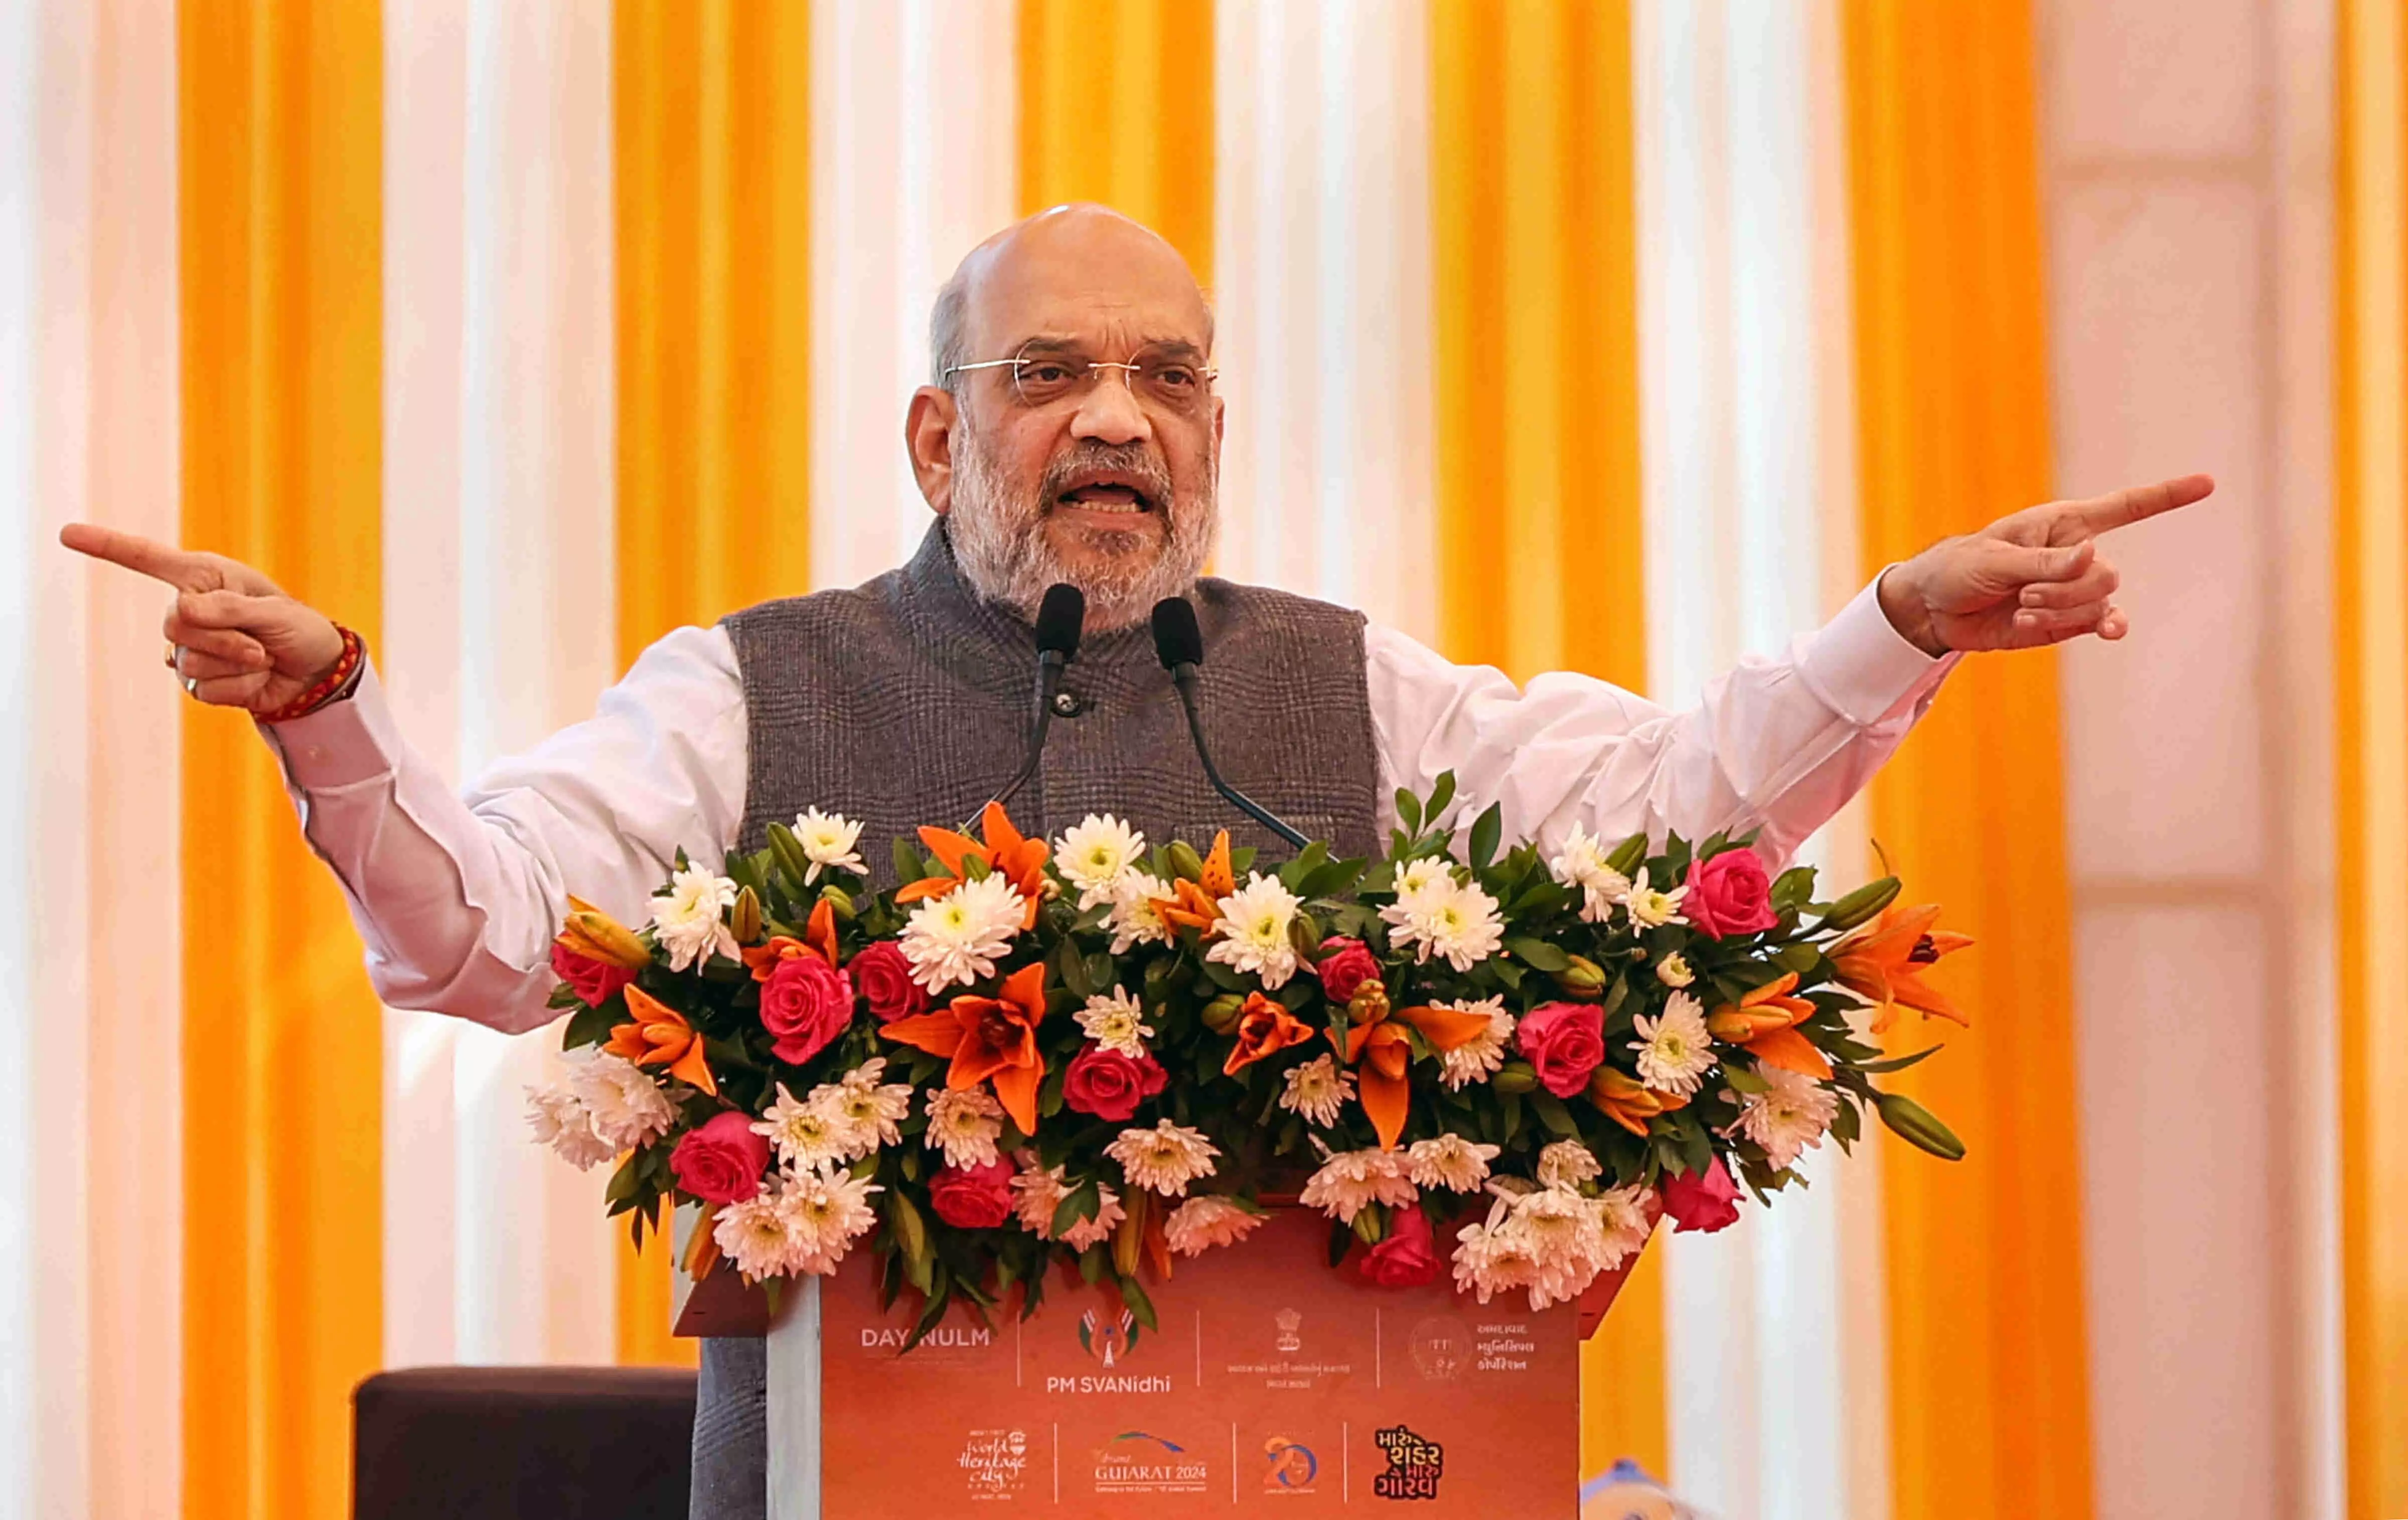 PM Modi aims to make 140 crore people including poor self-reliant: Amit Shah